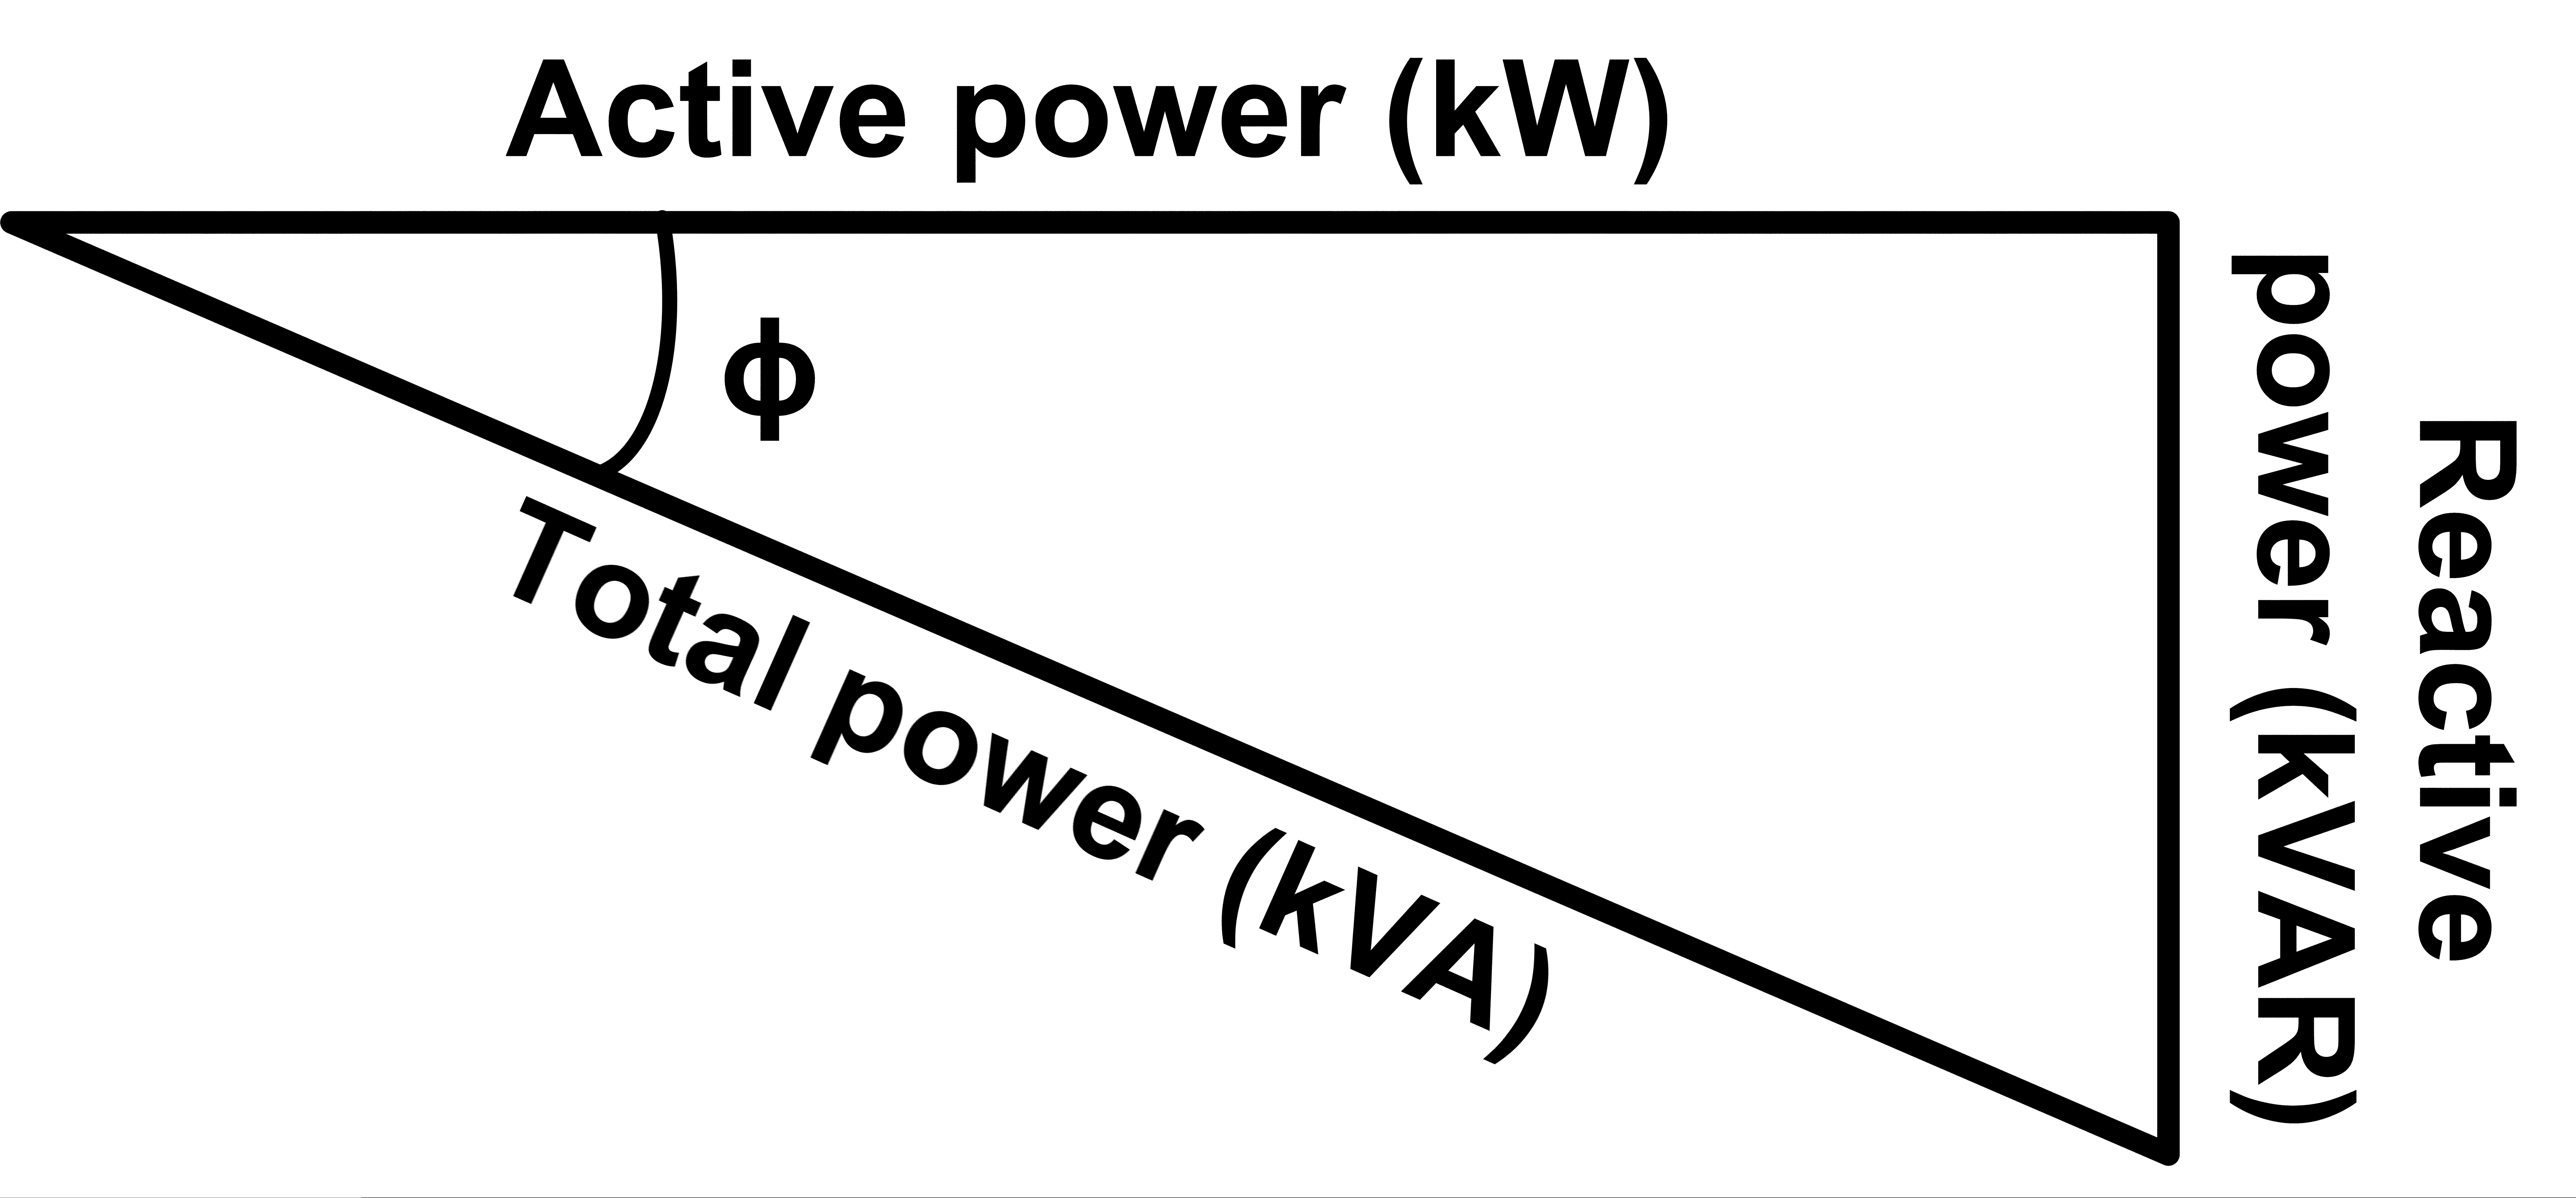 Power Factor triangle with the three points being Active power, Reactive and Total power. 